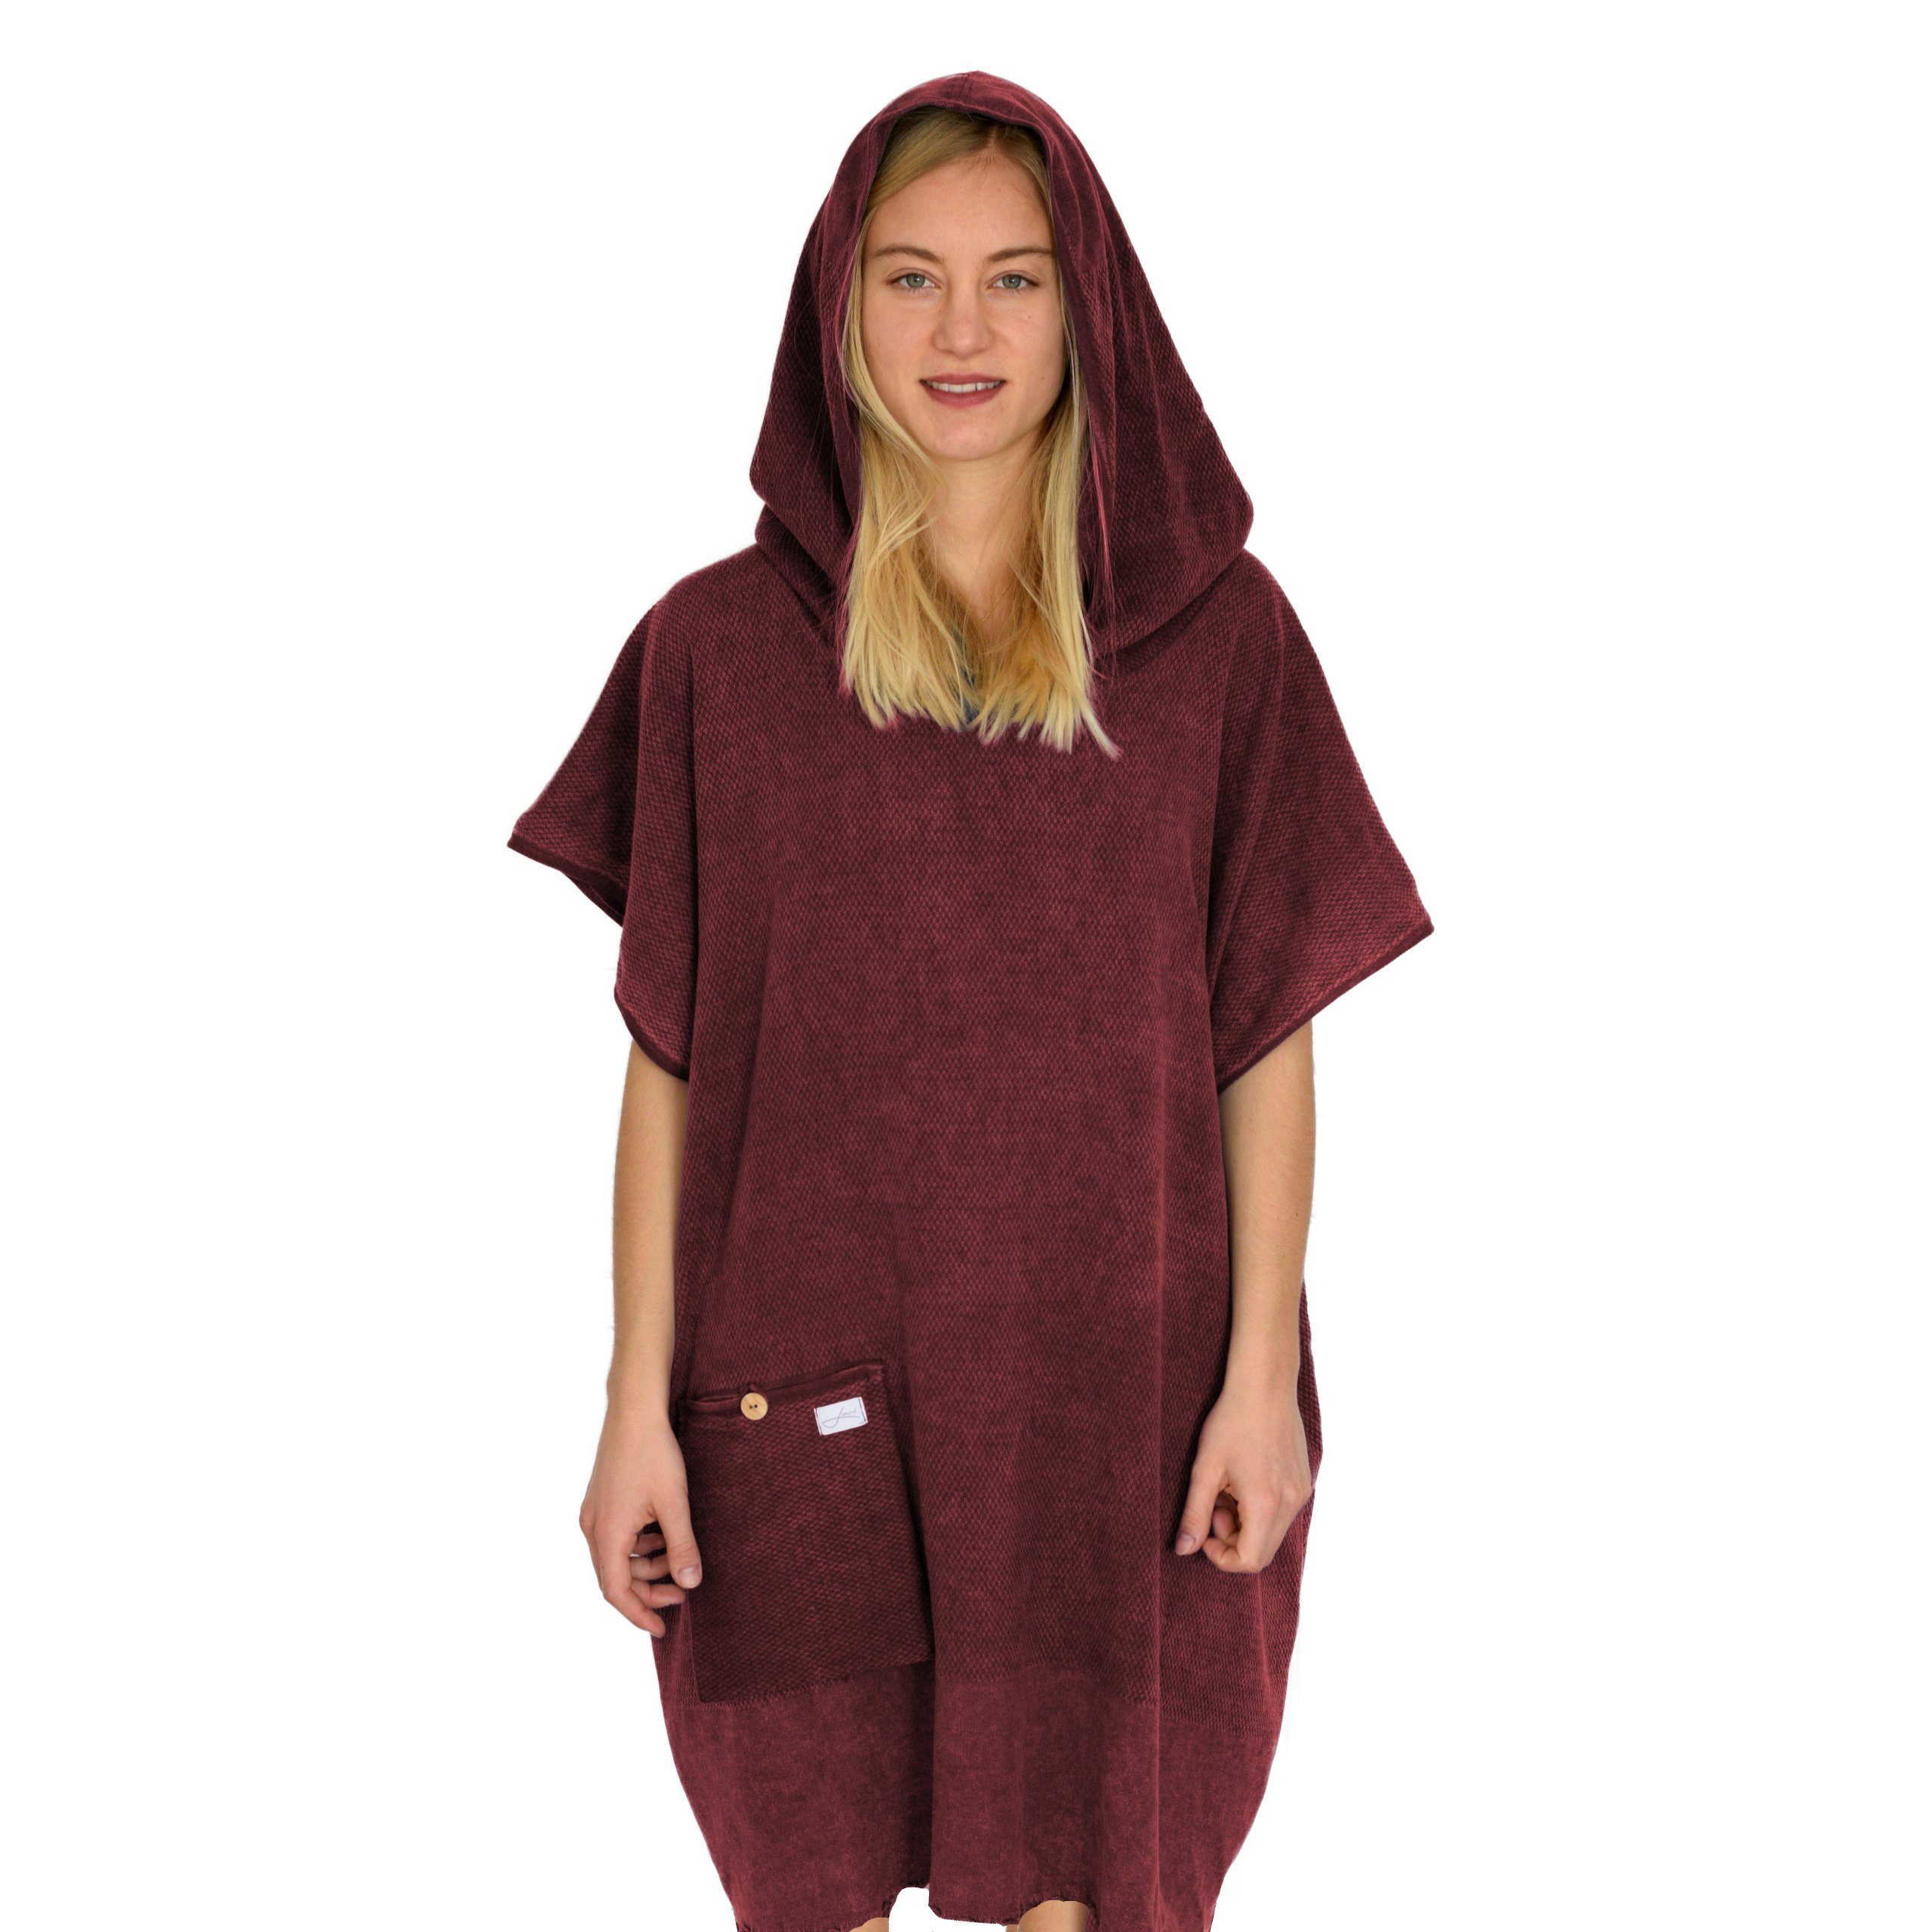 Badeponcho Germany in Kapuze Badeponcho Lou-i Surfponcho Made & burgundy trocken), schnell (leicht